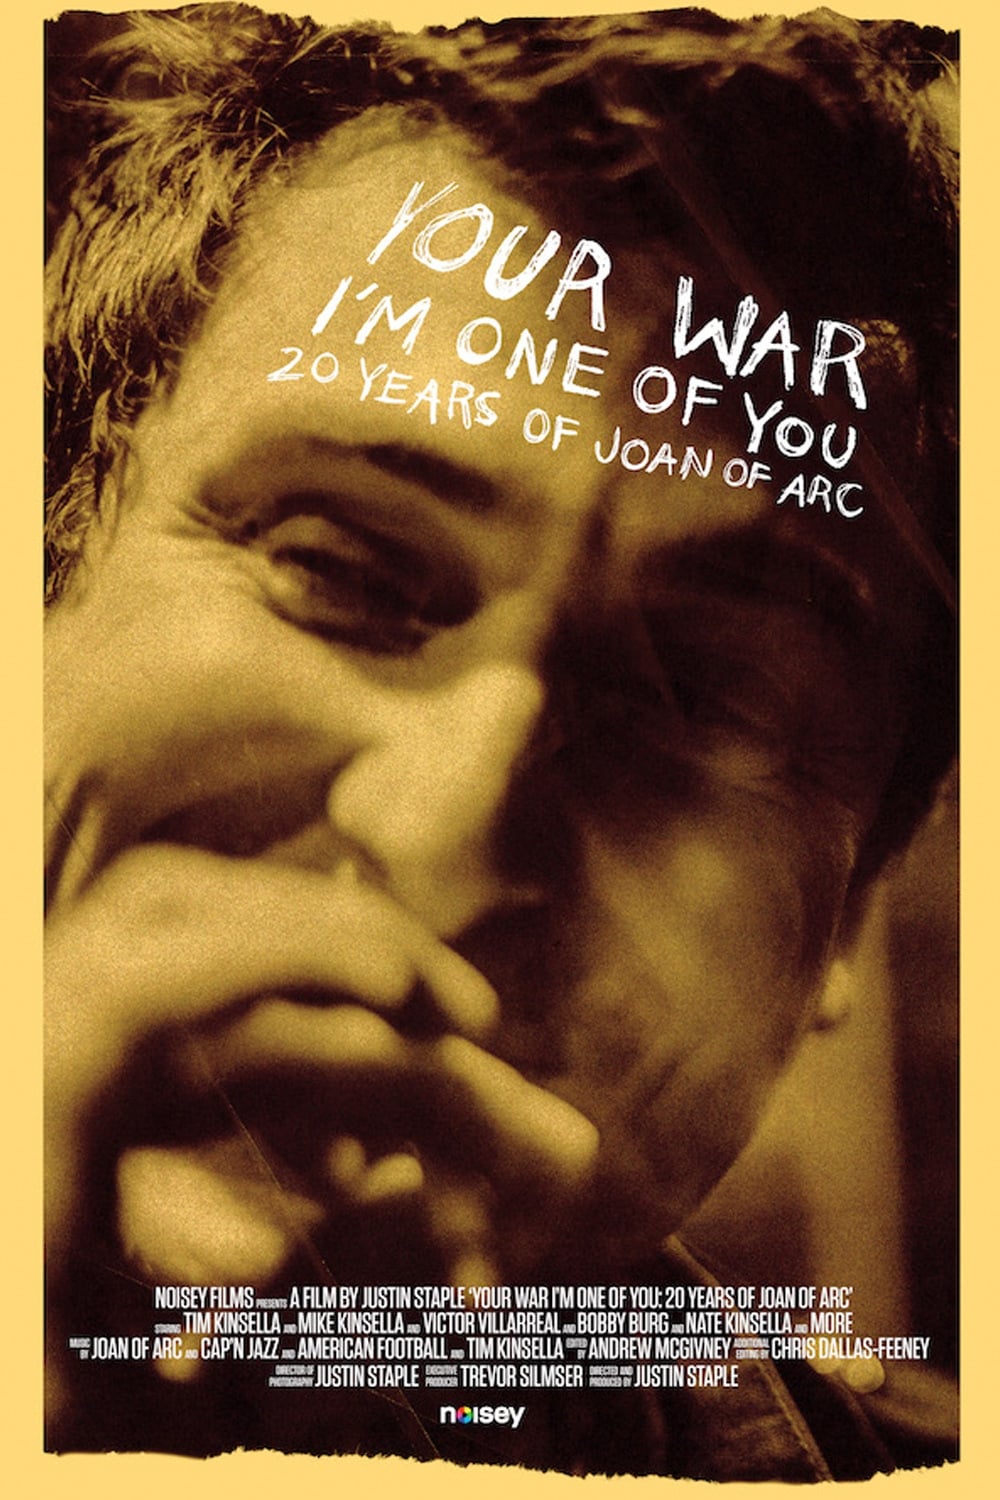 Your War (I'm One of You): 20 Years of Joan of Arc